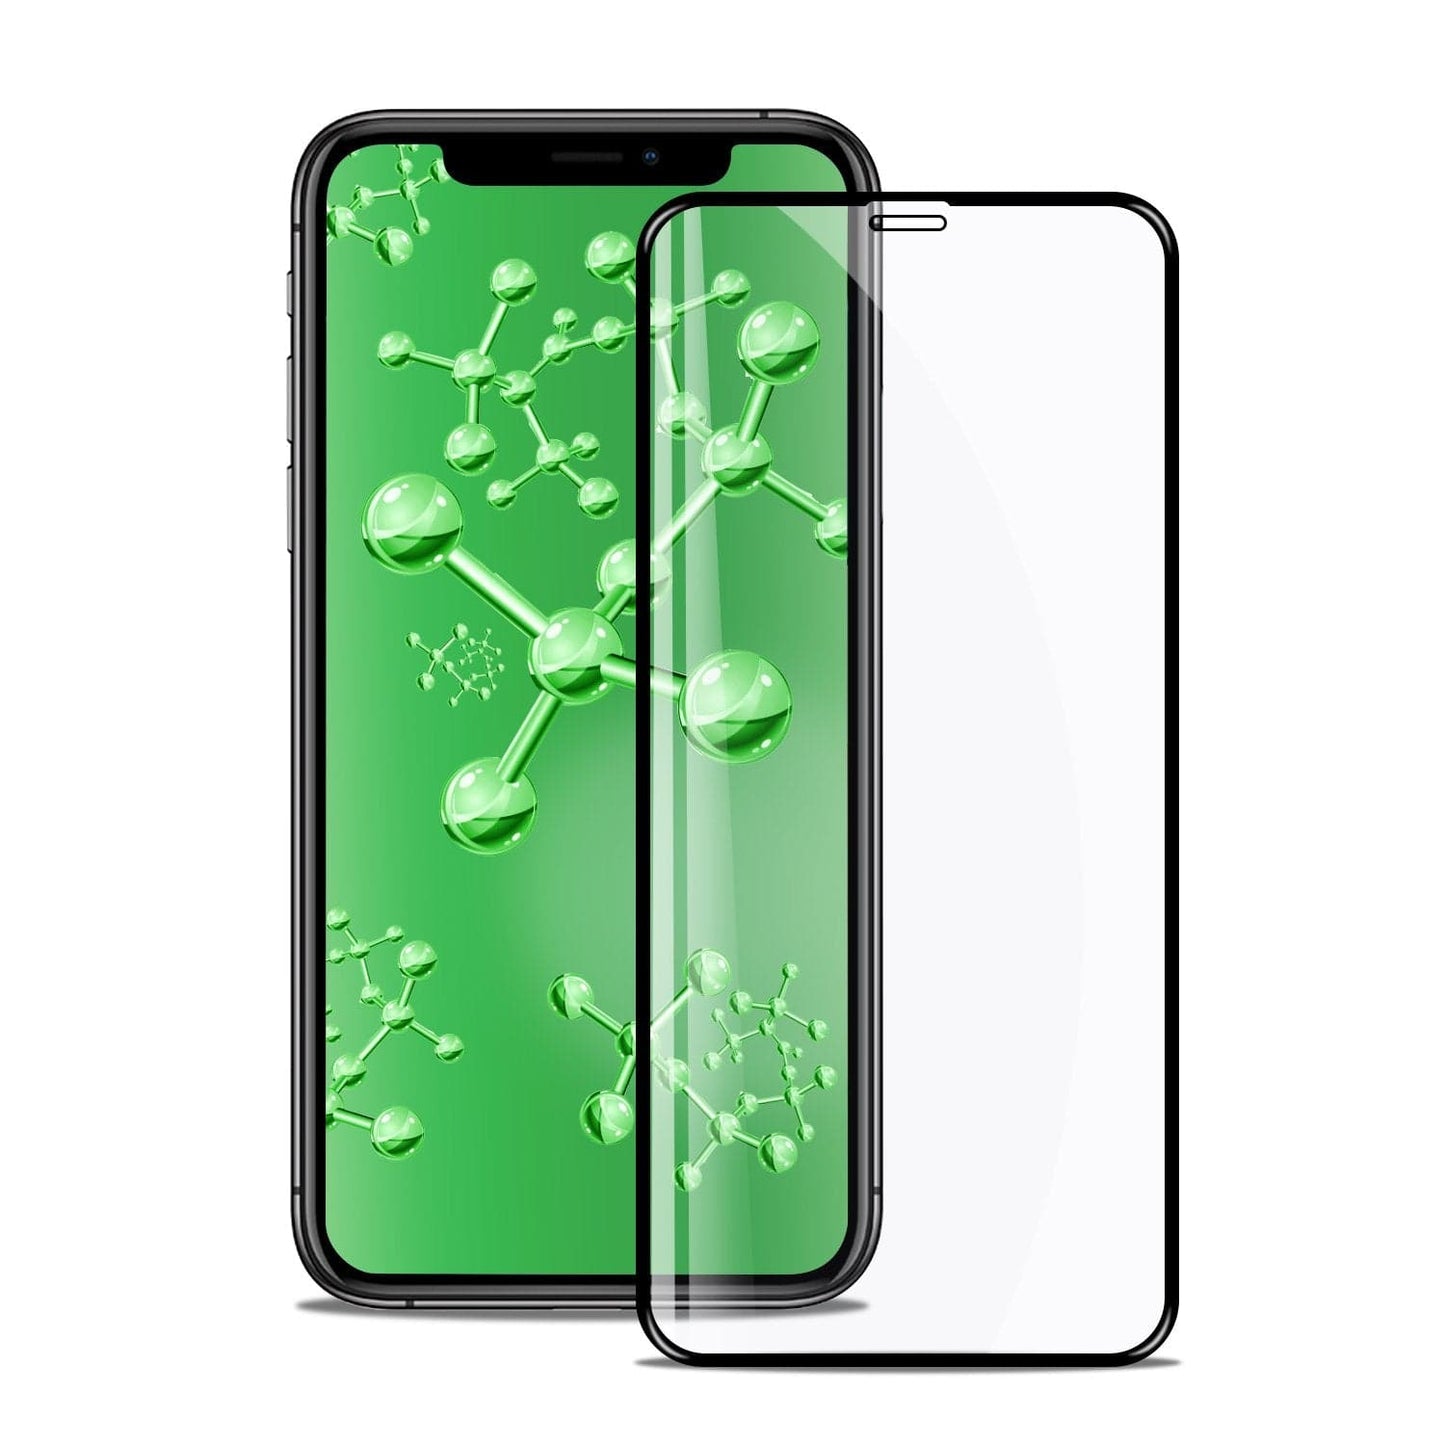 iPhone 11 Tempered Glass Screen Protector Tough on Antibacterial